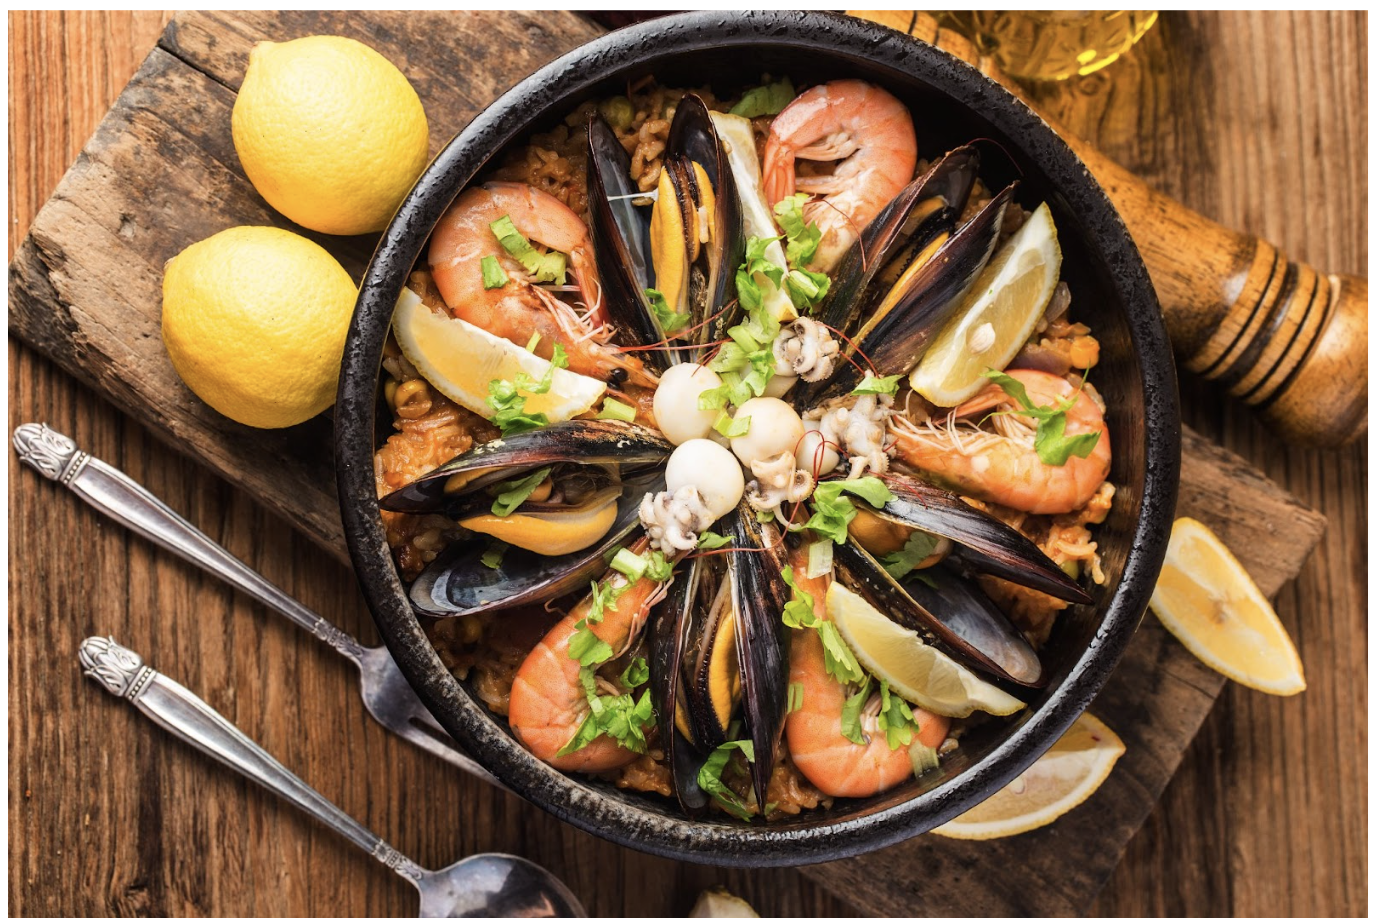 Seafood Delights of Costa Blanca: Must-Try Dishes from the Mediterranean